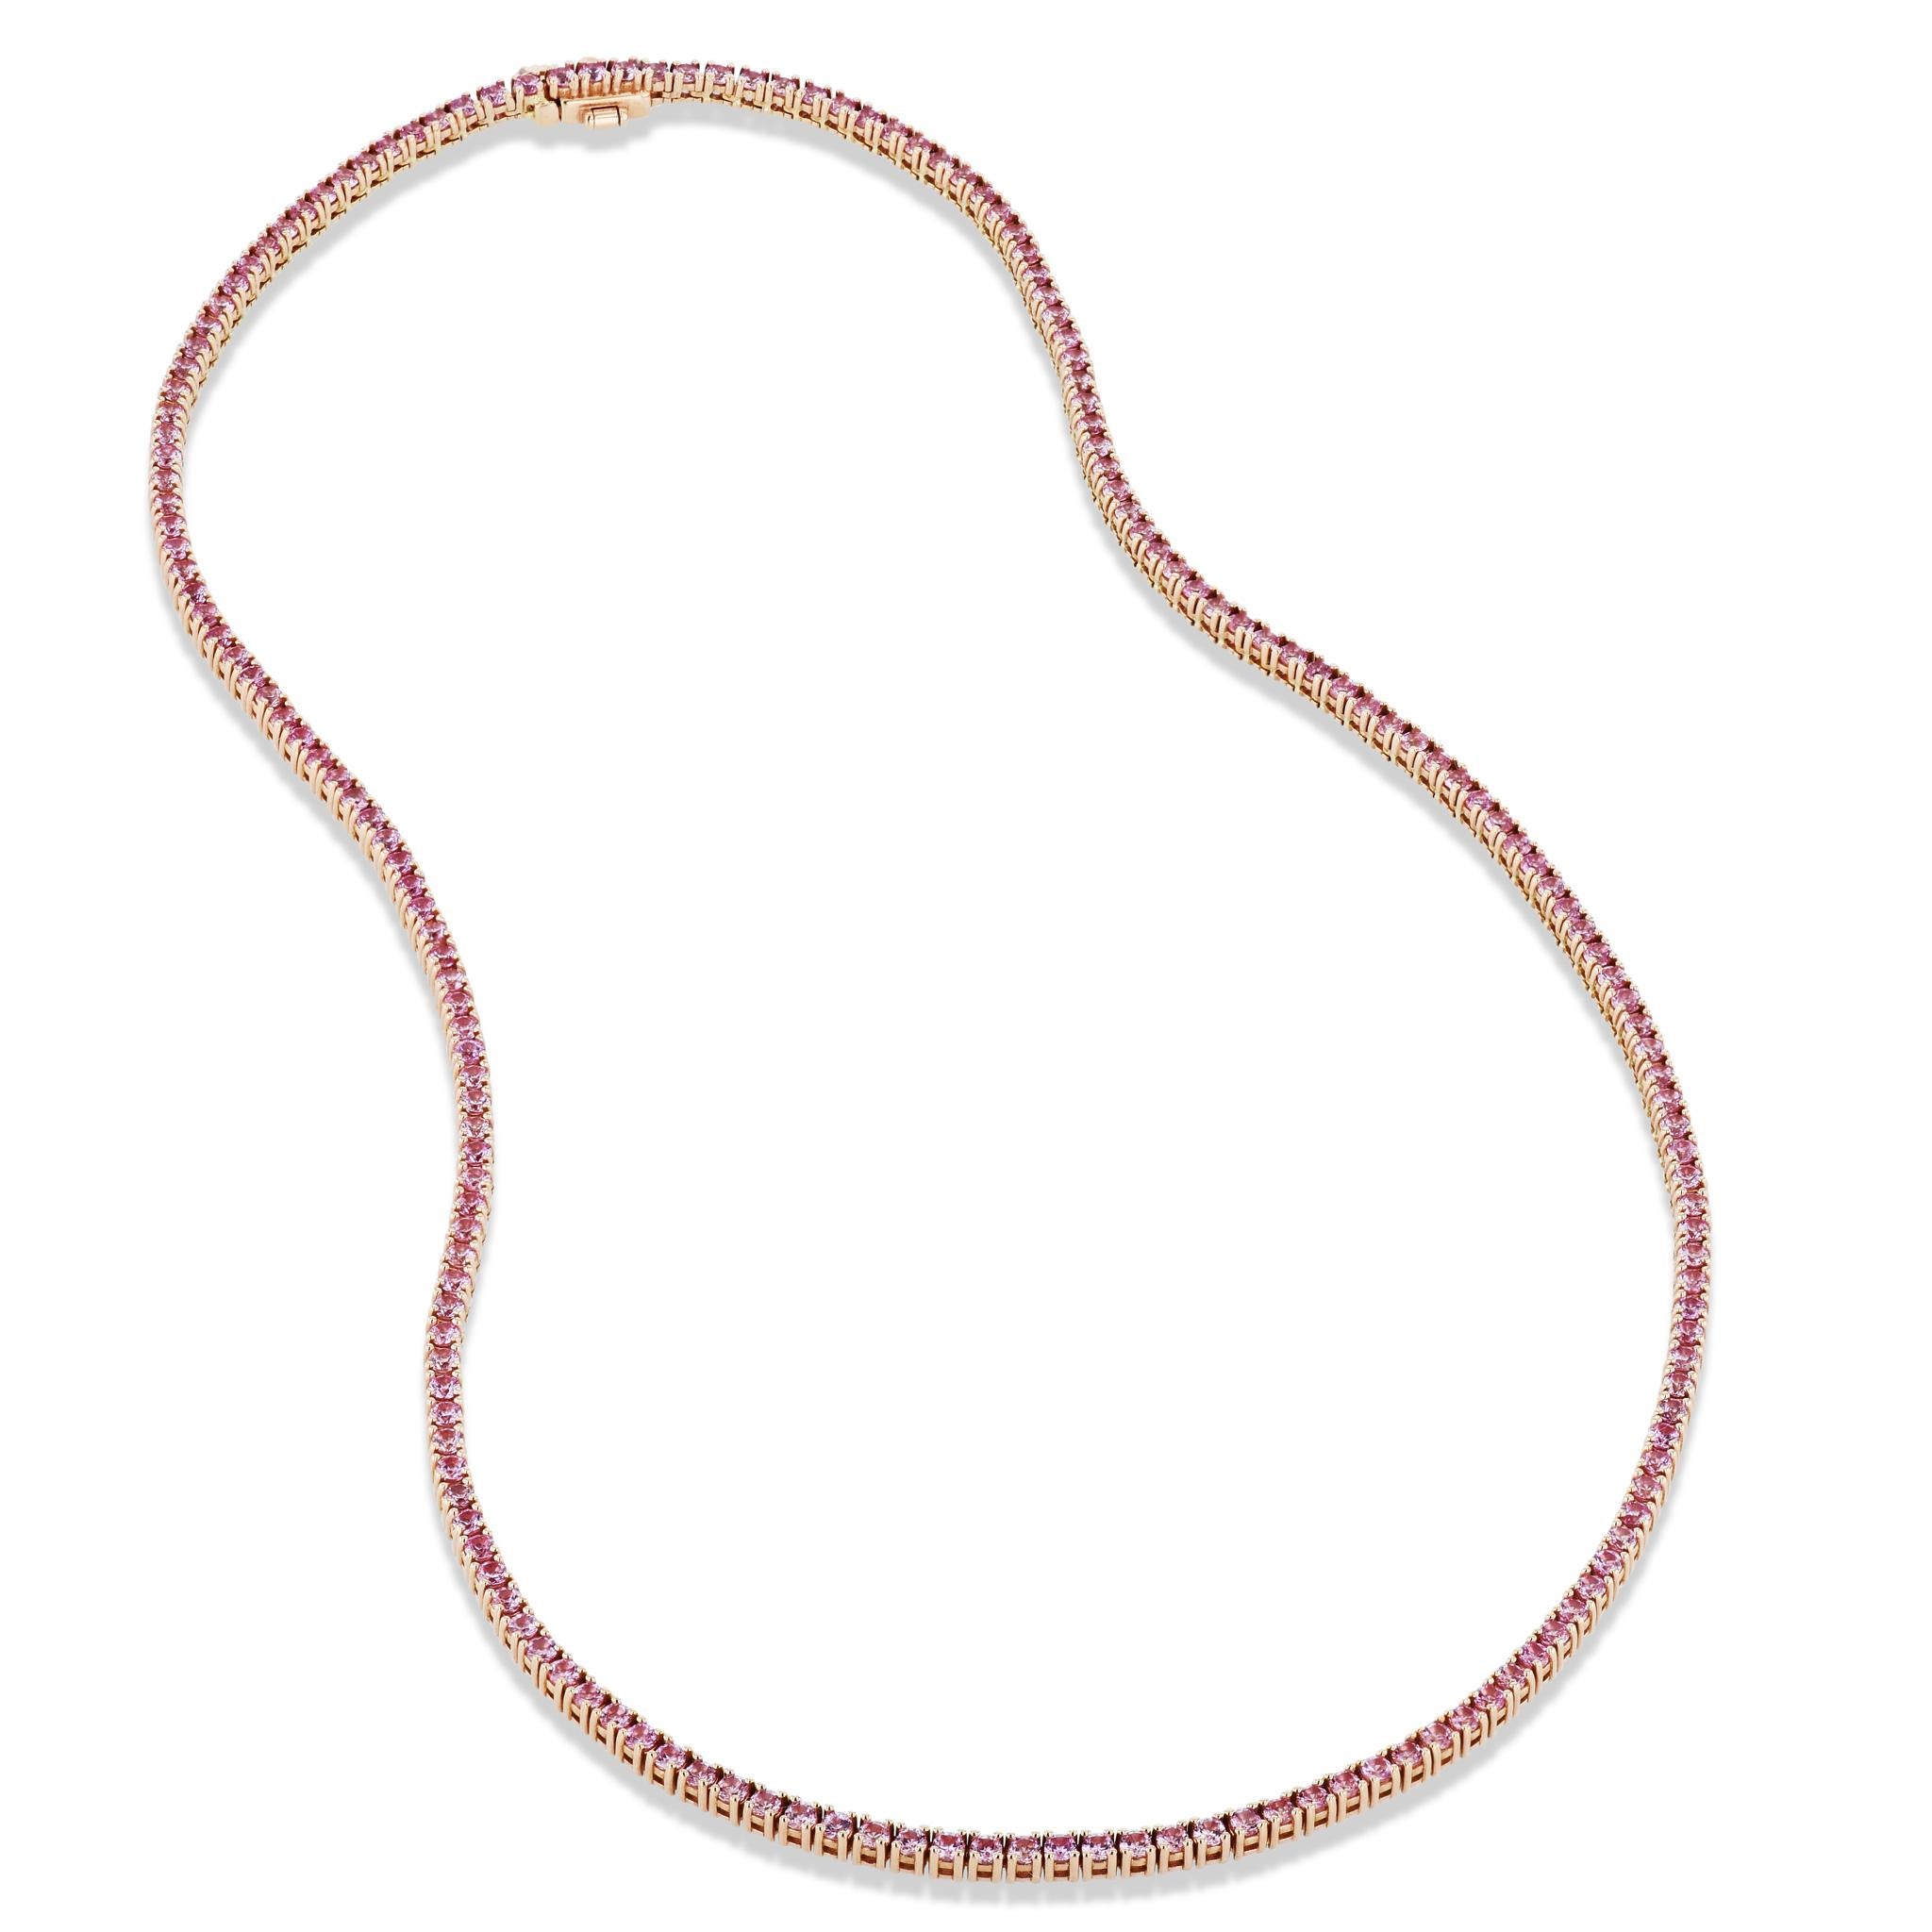 Handmade 7.58 Carat Pink Sapphire Tennis Necklace Rose Gold  In New Condition For Sale In Miami, FL